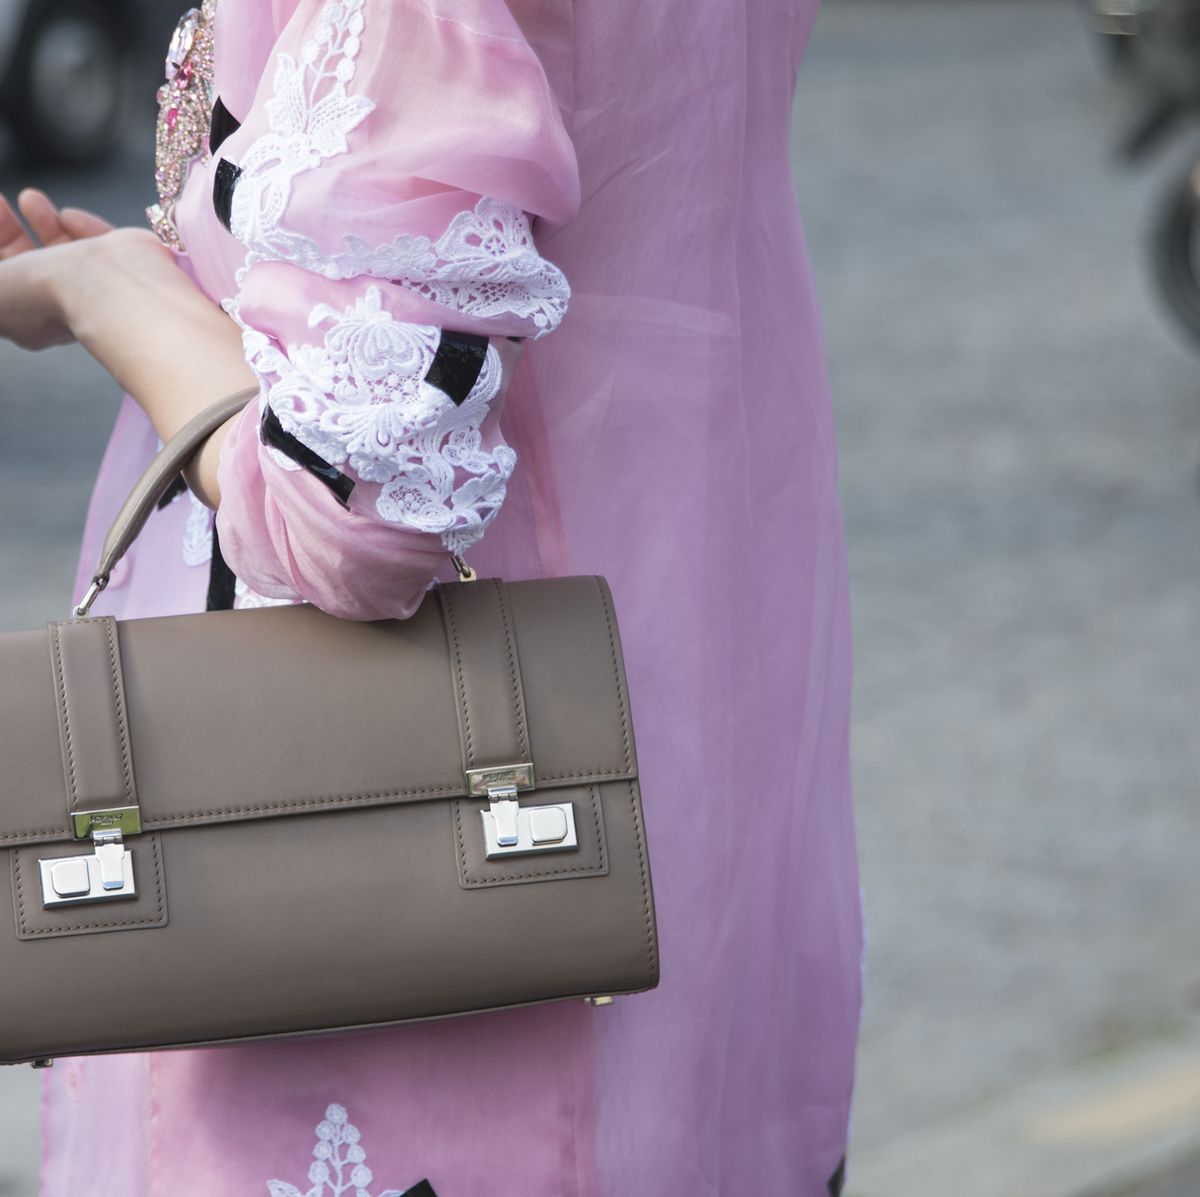 Hit the Streets in Style with the Louis Vuitton City Steamer Bag